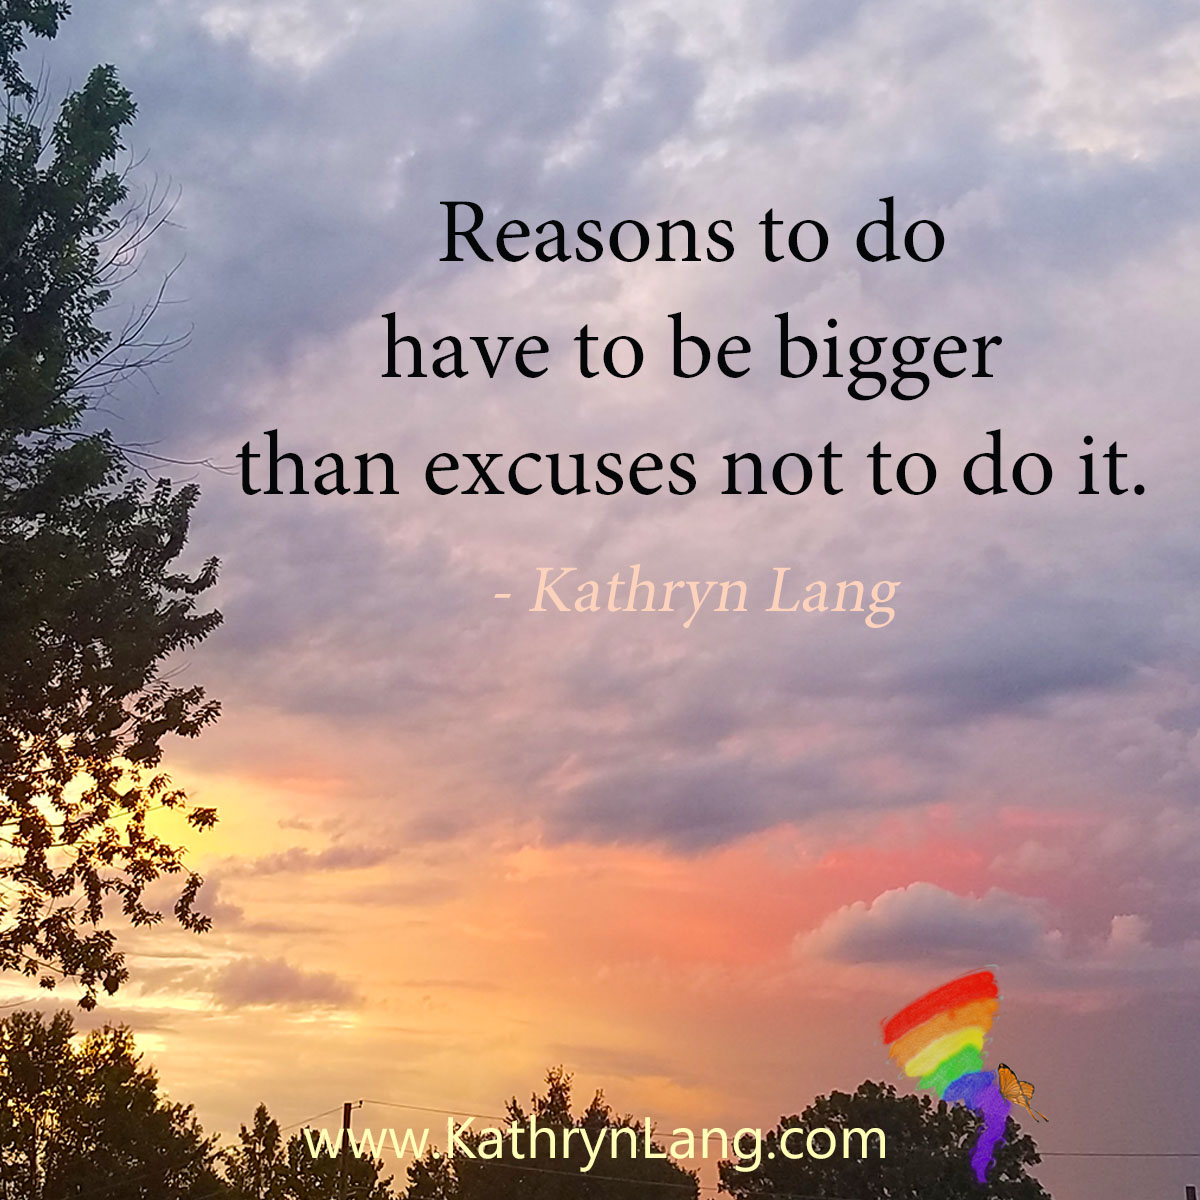 #QuoteoftheDay

Reasons to do have to be bigger
 than excuses not to do it.
- Kathryn Lang